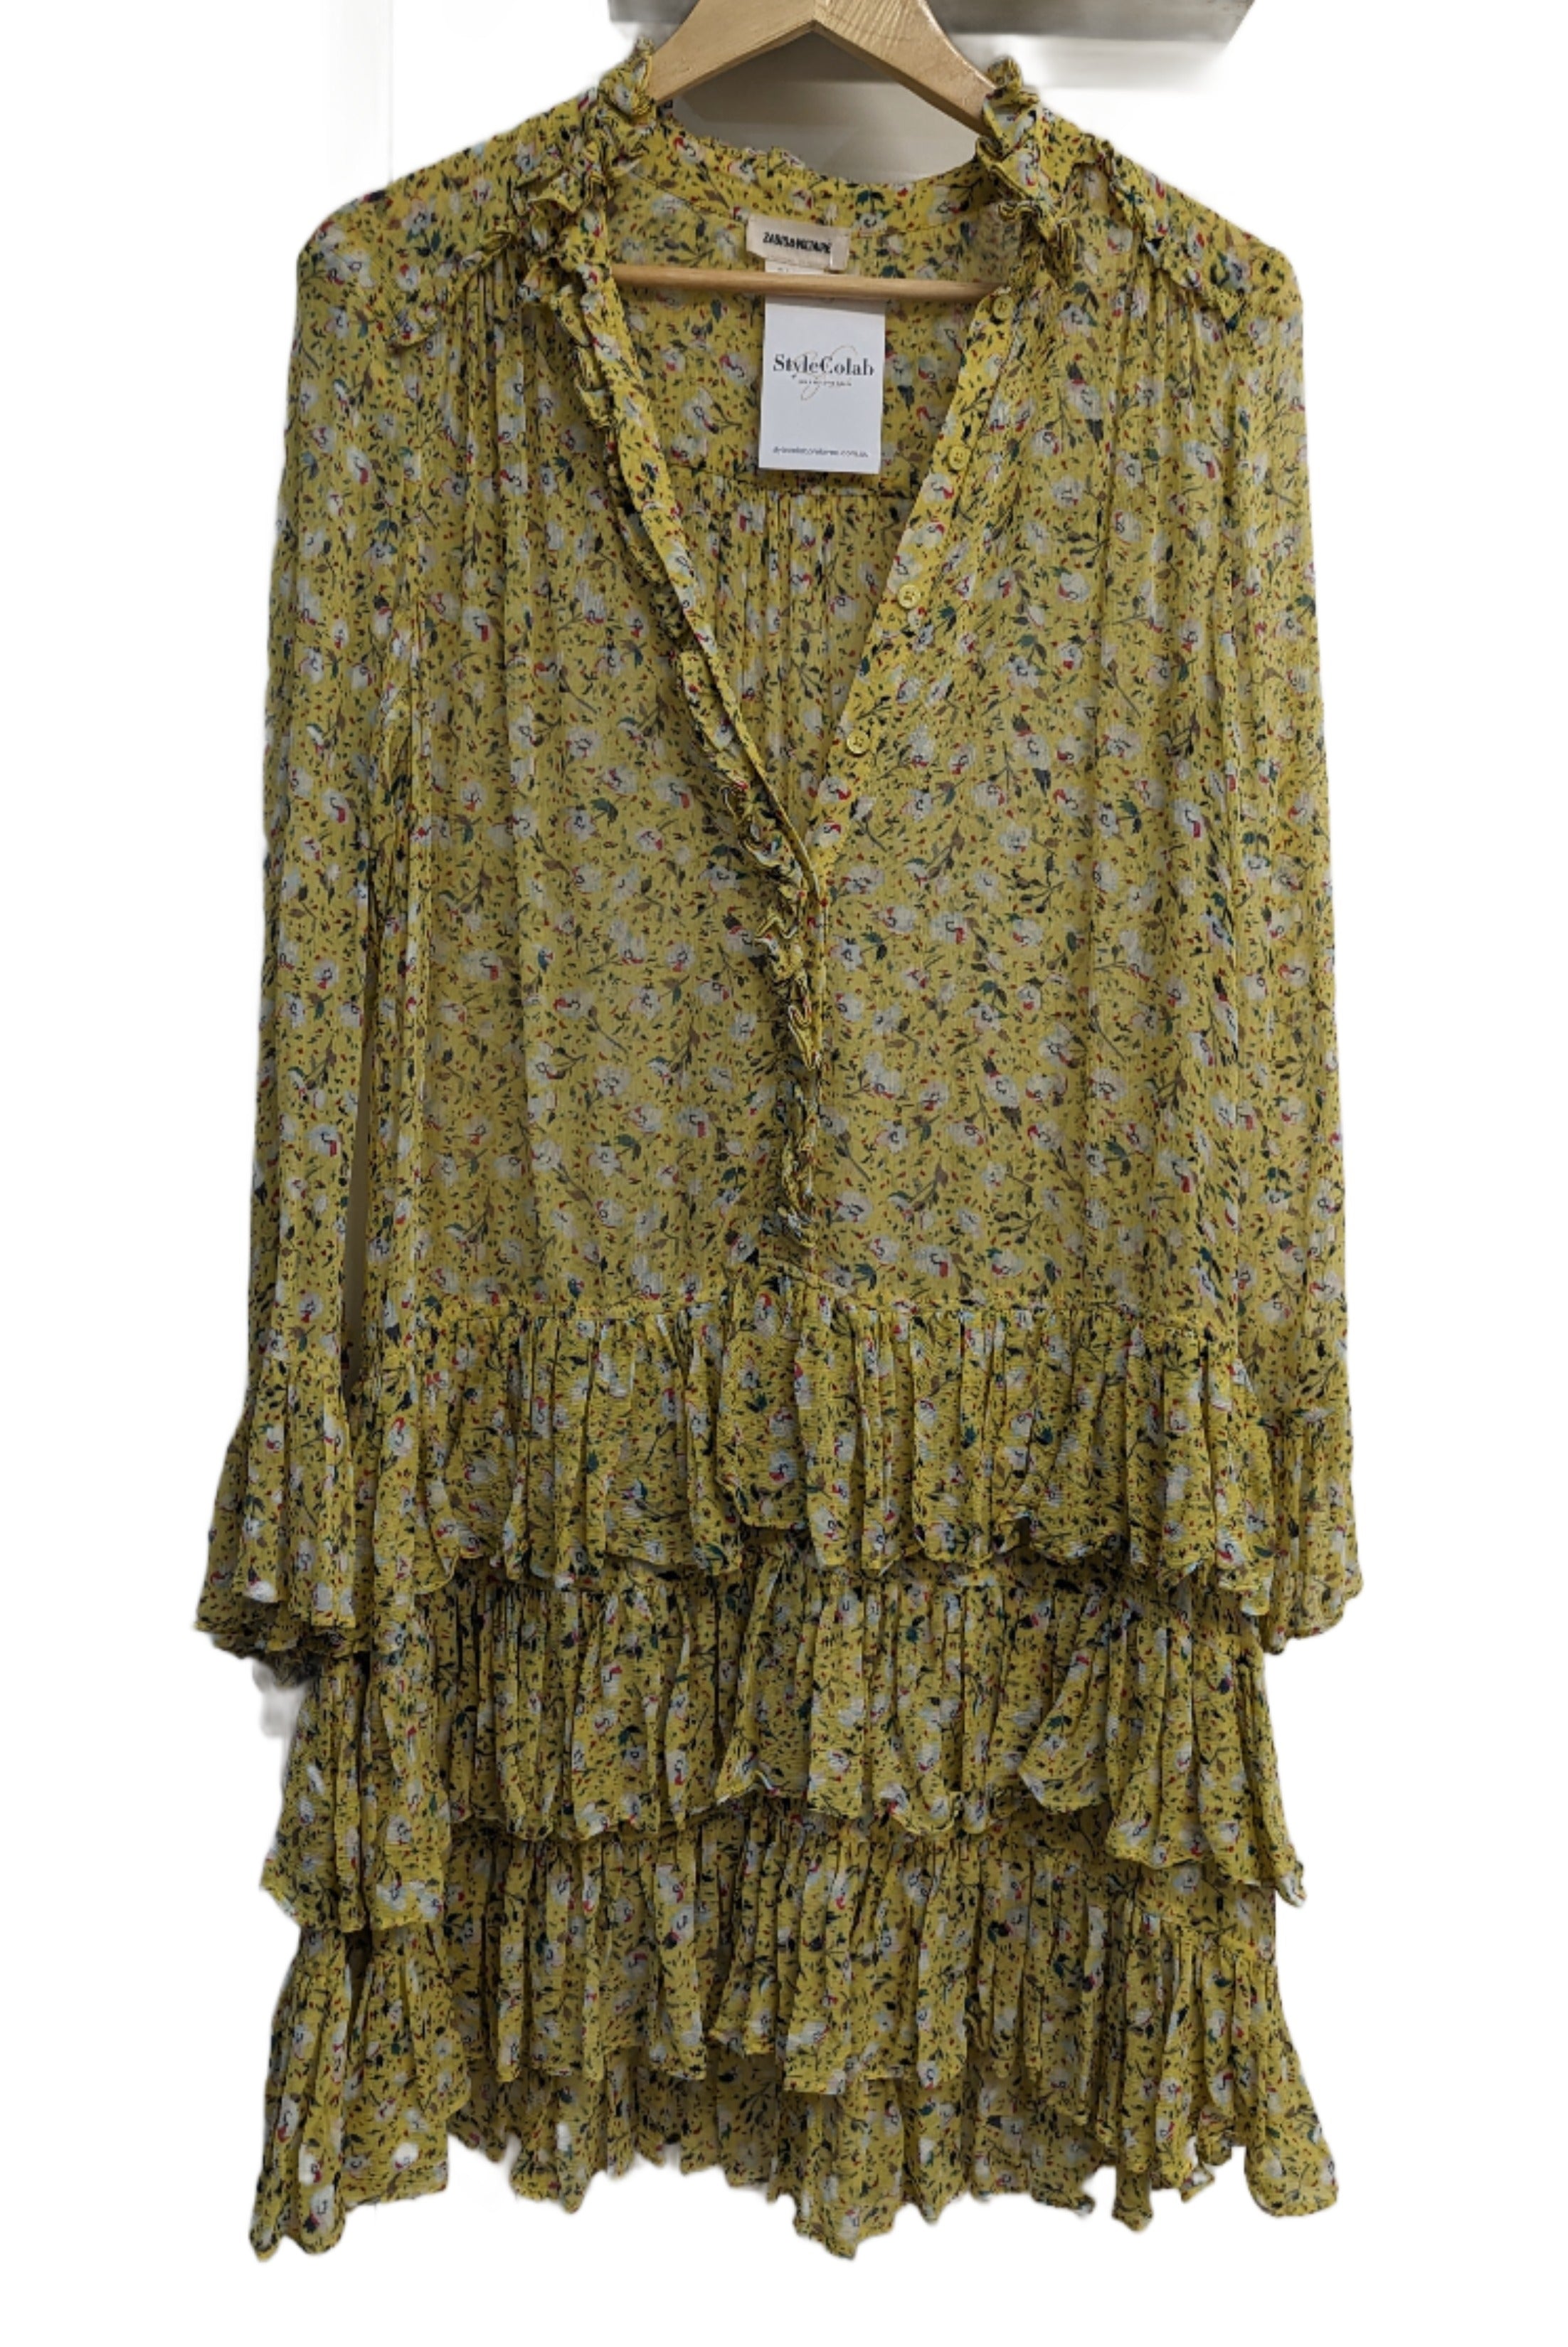 Zadig & Voltaire Yellow Floral Dress